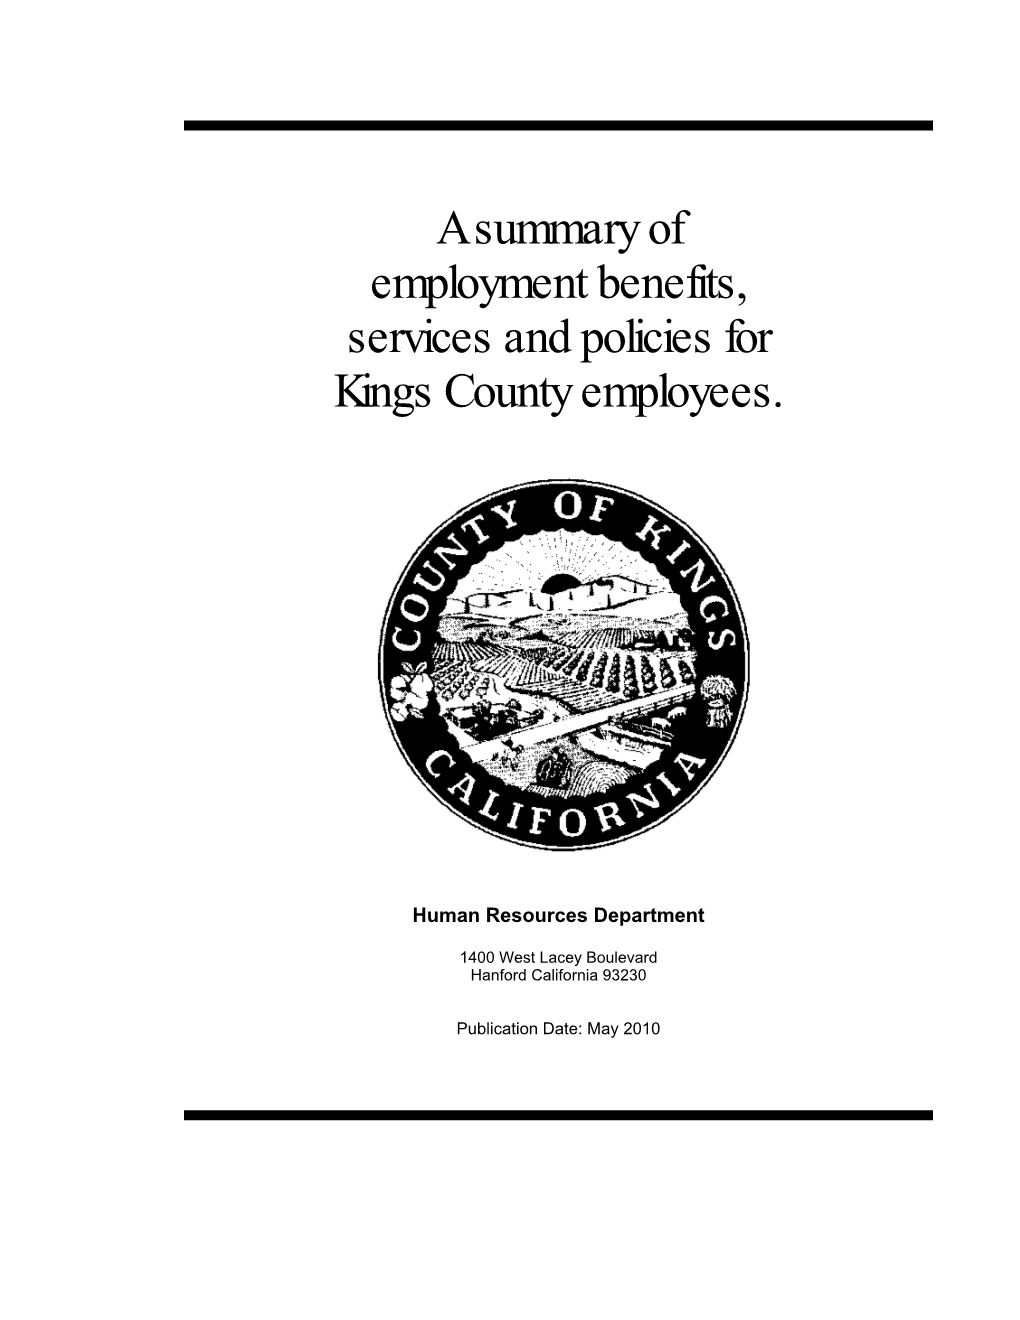 A Summary of Employment Benefits, Services and Policies for Kings County Employees